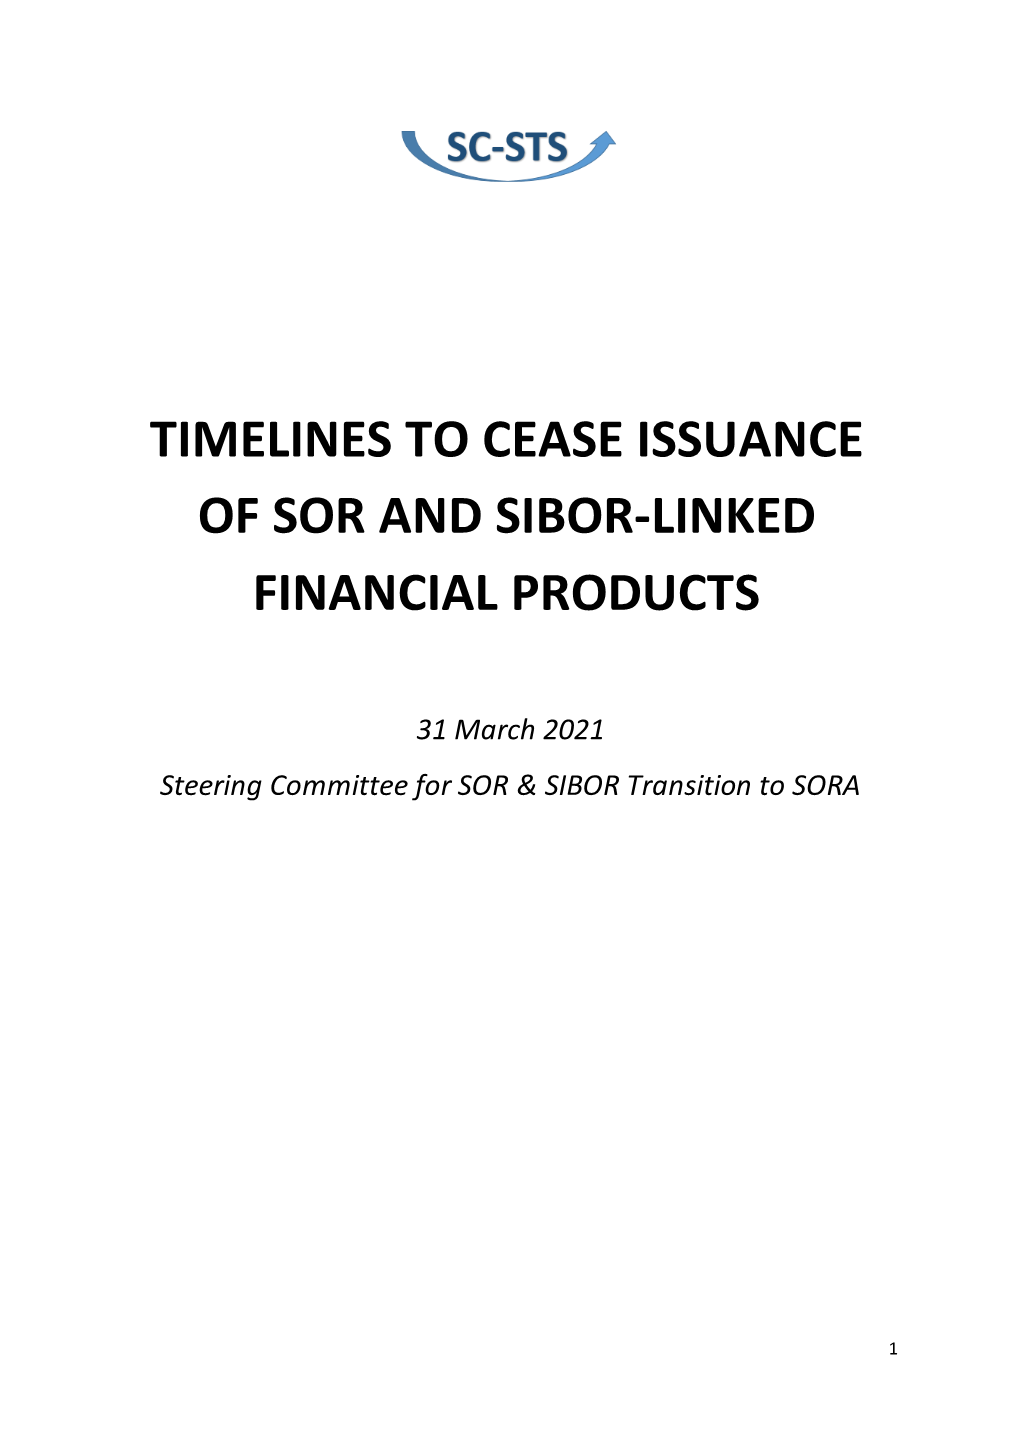 Timelines to Cease Issuance of Sor and Sibor-Linked Financial Products